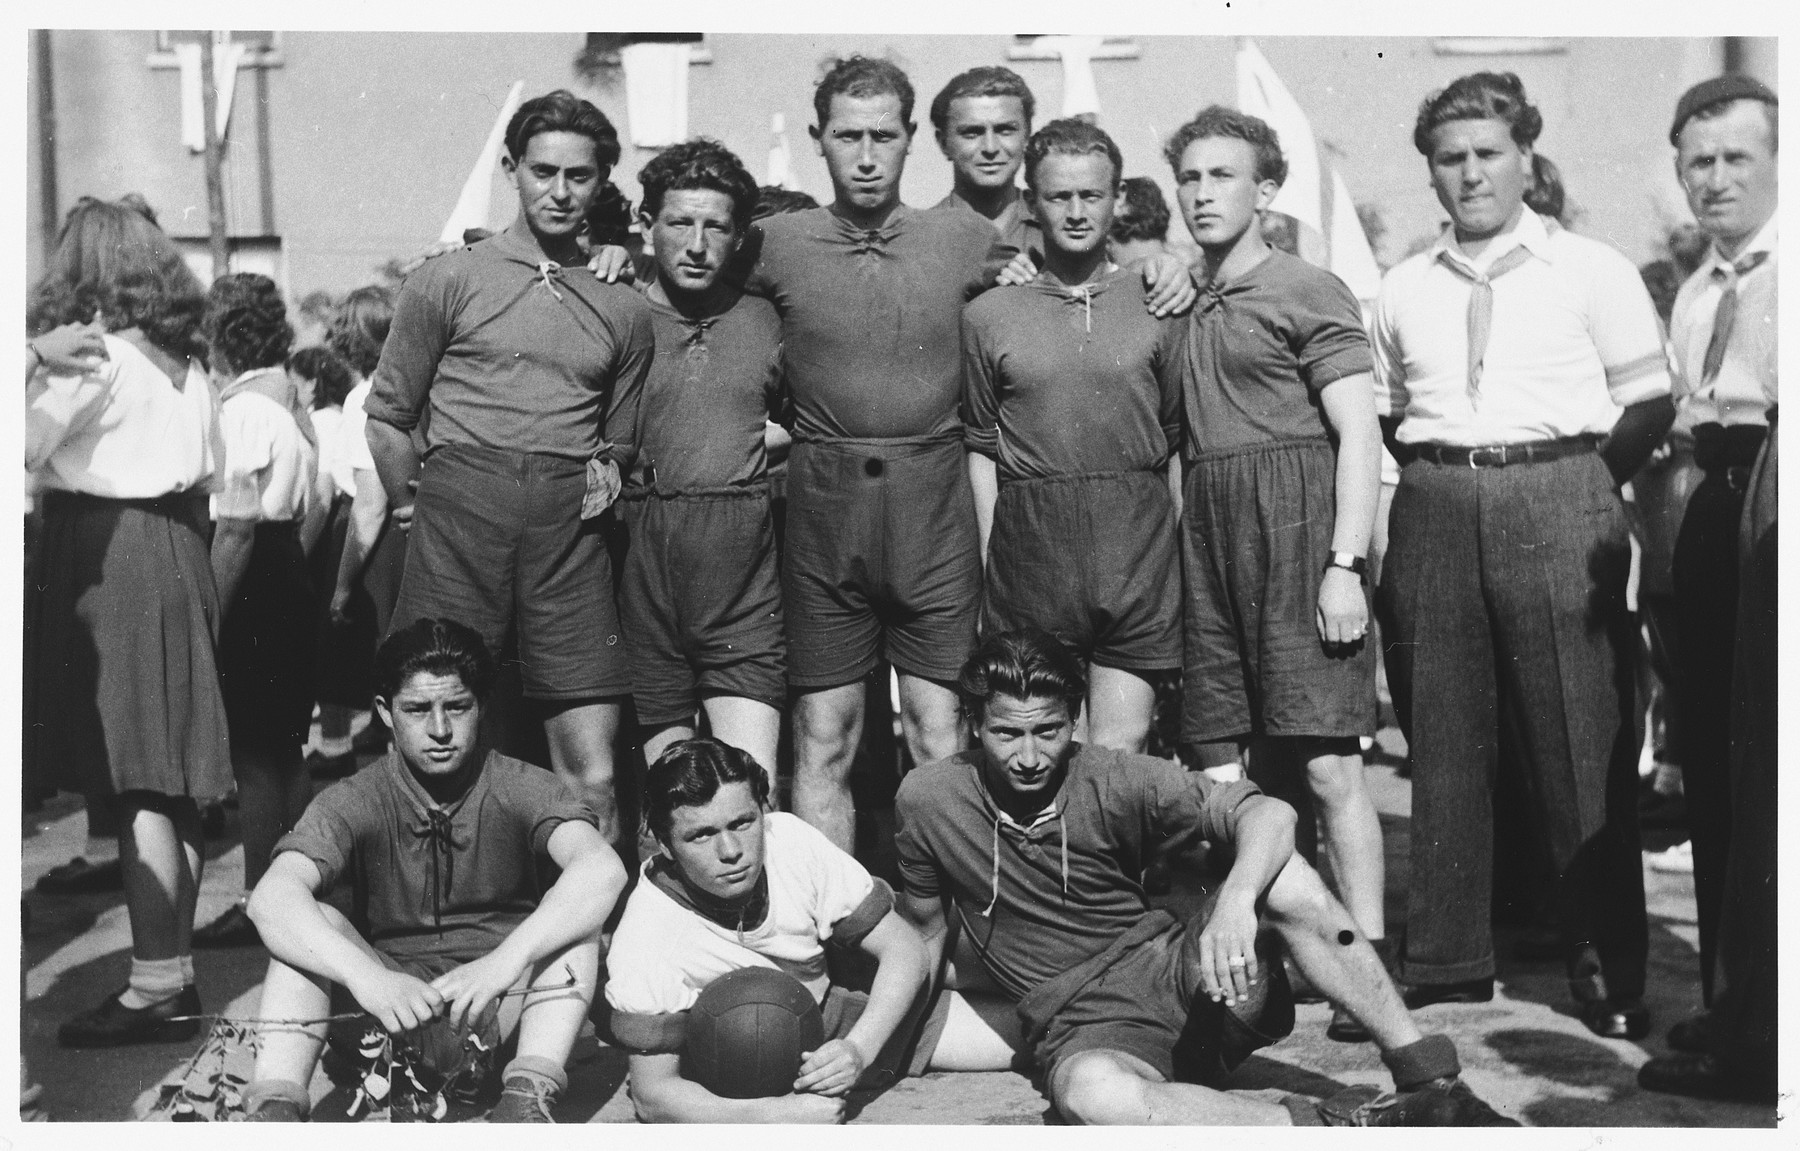 Group portrait of members of a soccer team in the Bergen-Belsen displaced persons camp.